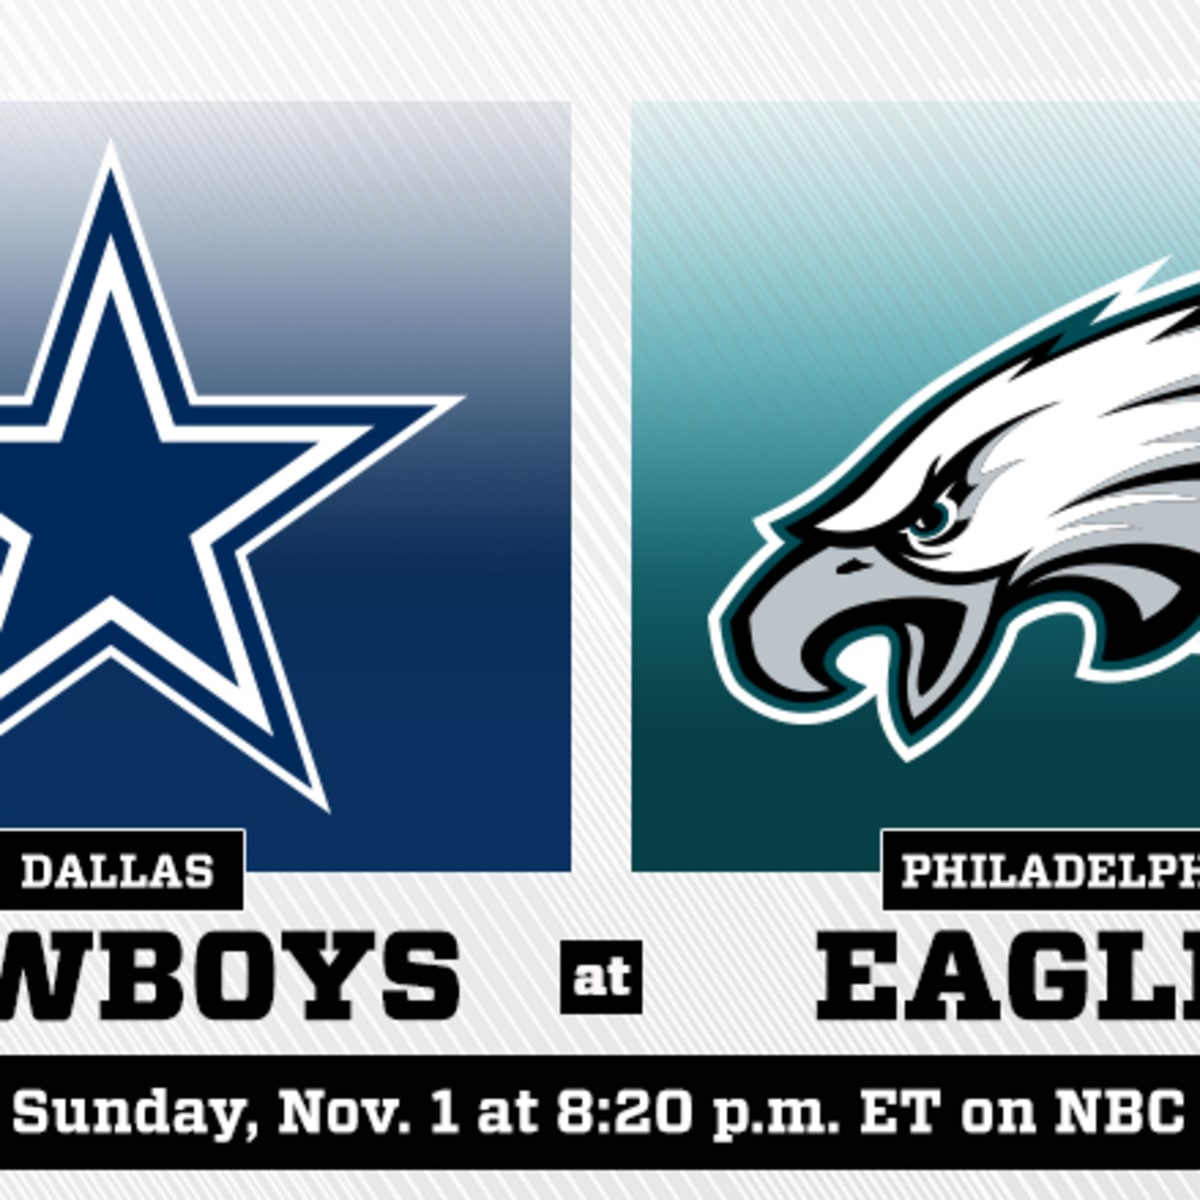 the eagles and the cowboys